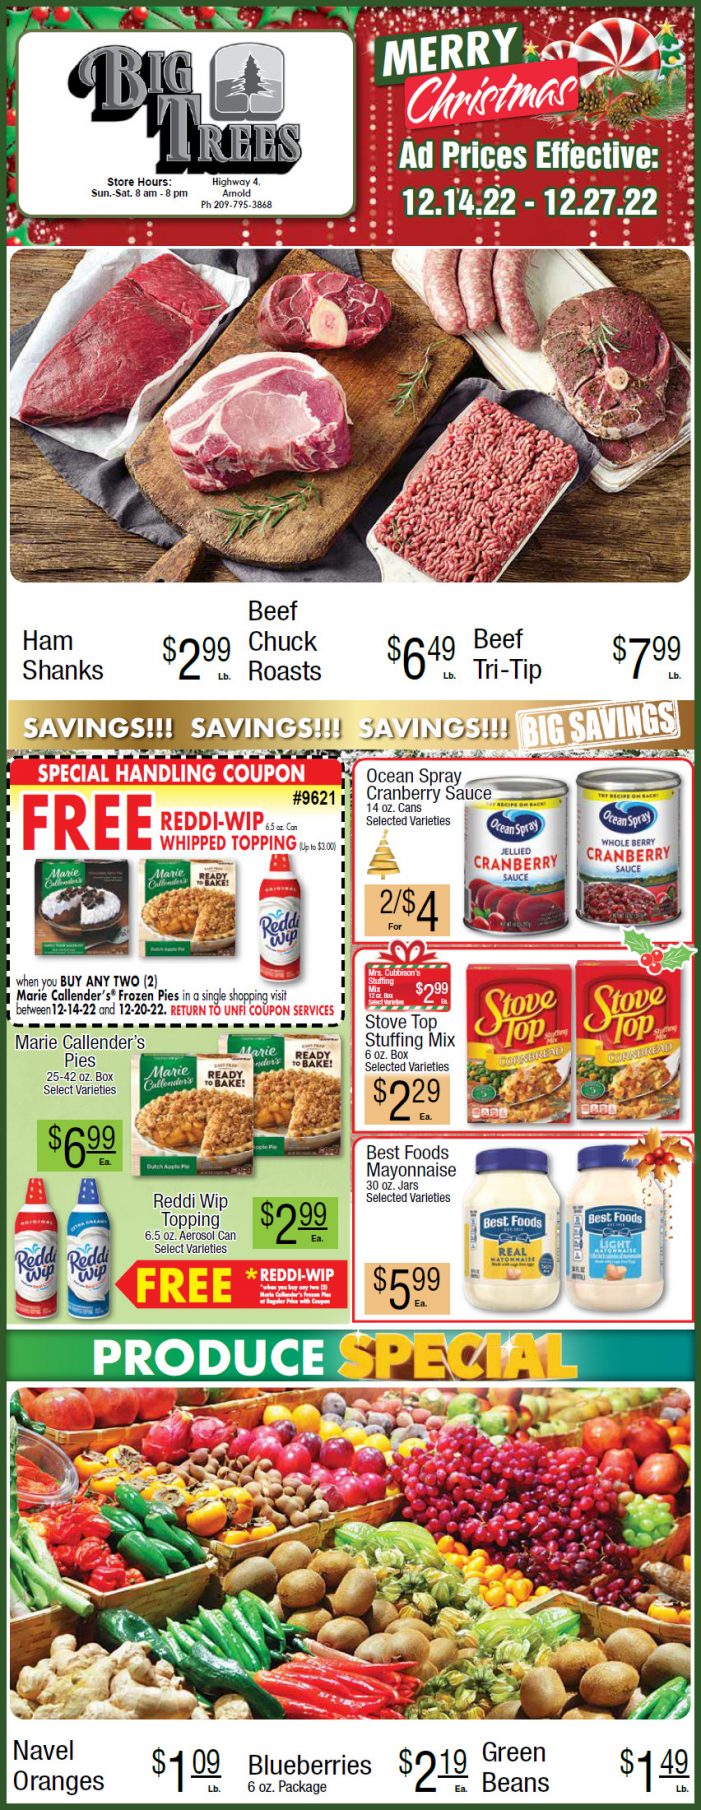 Big Trees Market Weekly Ad & Grocery & Christmas Specials December 14 – 27th!  Shop Local & Save!!